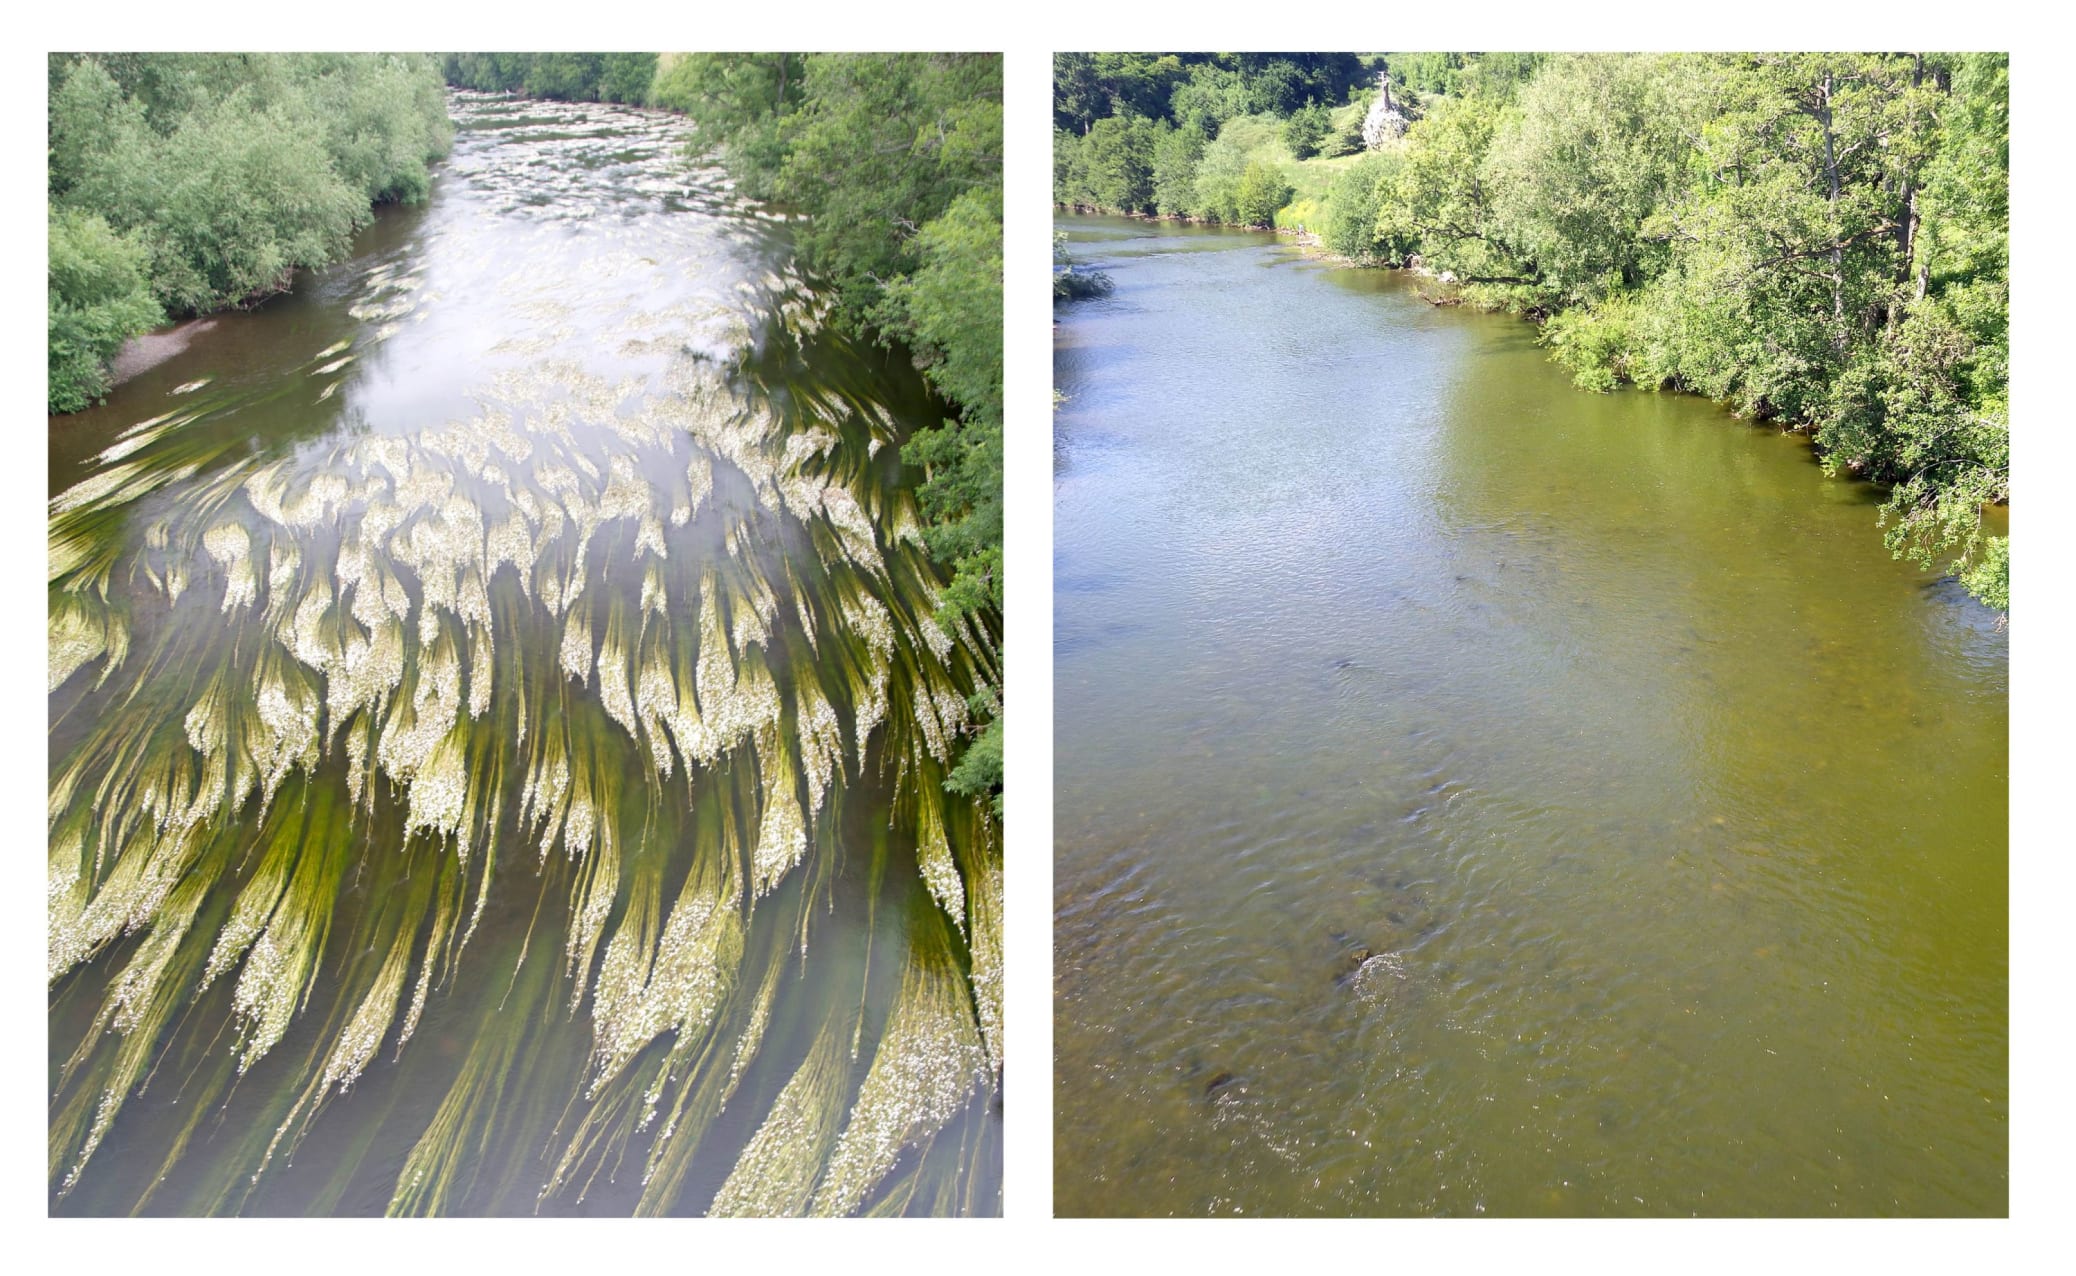 Left: The Wye at Bridge Sollers, a few miles upstream of Hereford, in July 2013 showing clear water and extensive beds of ranunculus. Right: Early June this year. The photo clearly shows the algal bloom and, although earlier in the year, a significan